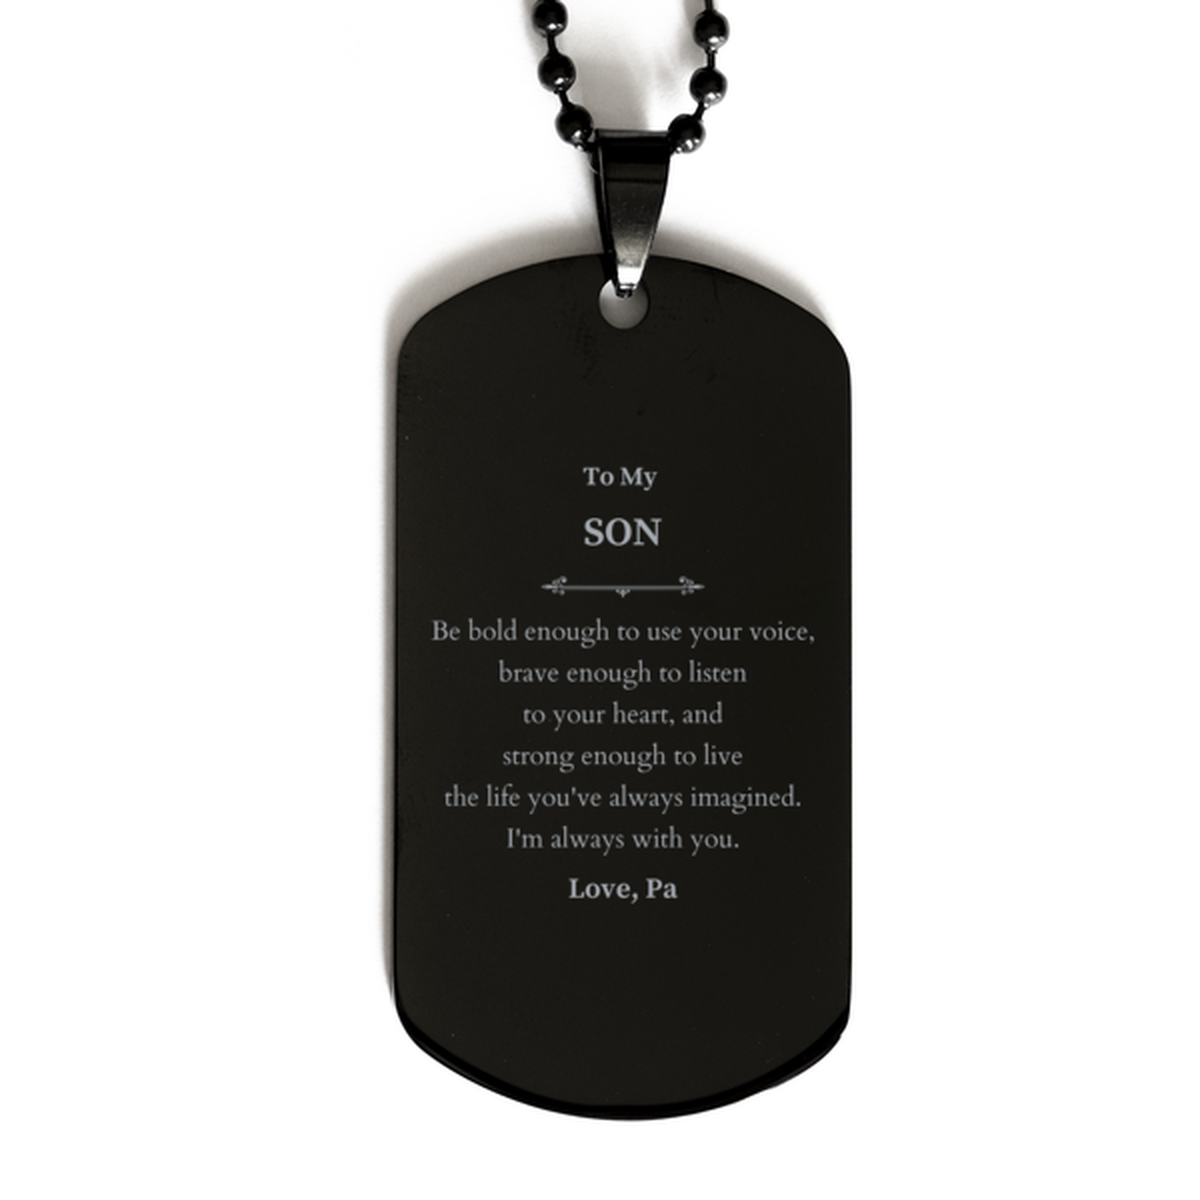 Keepsake Son Black Dog Tag Gift Idea Graduation Christmas Birthday Son from Pa, Son Be bold enough to use your voice, brave enough to listen to your heart. Love, Pa